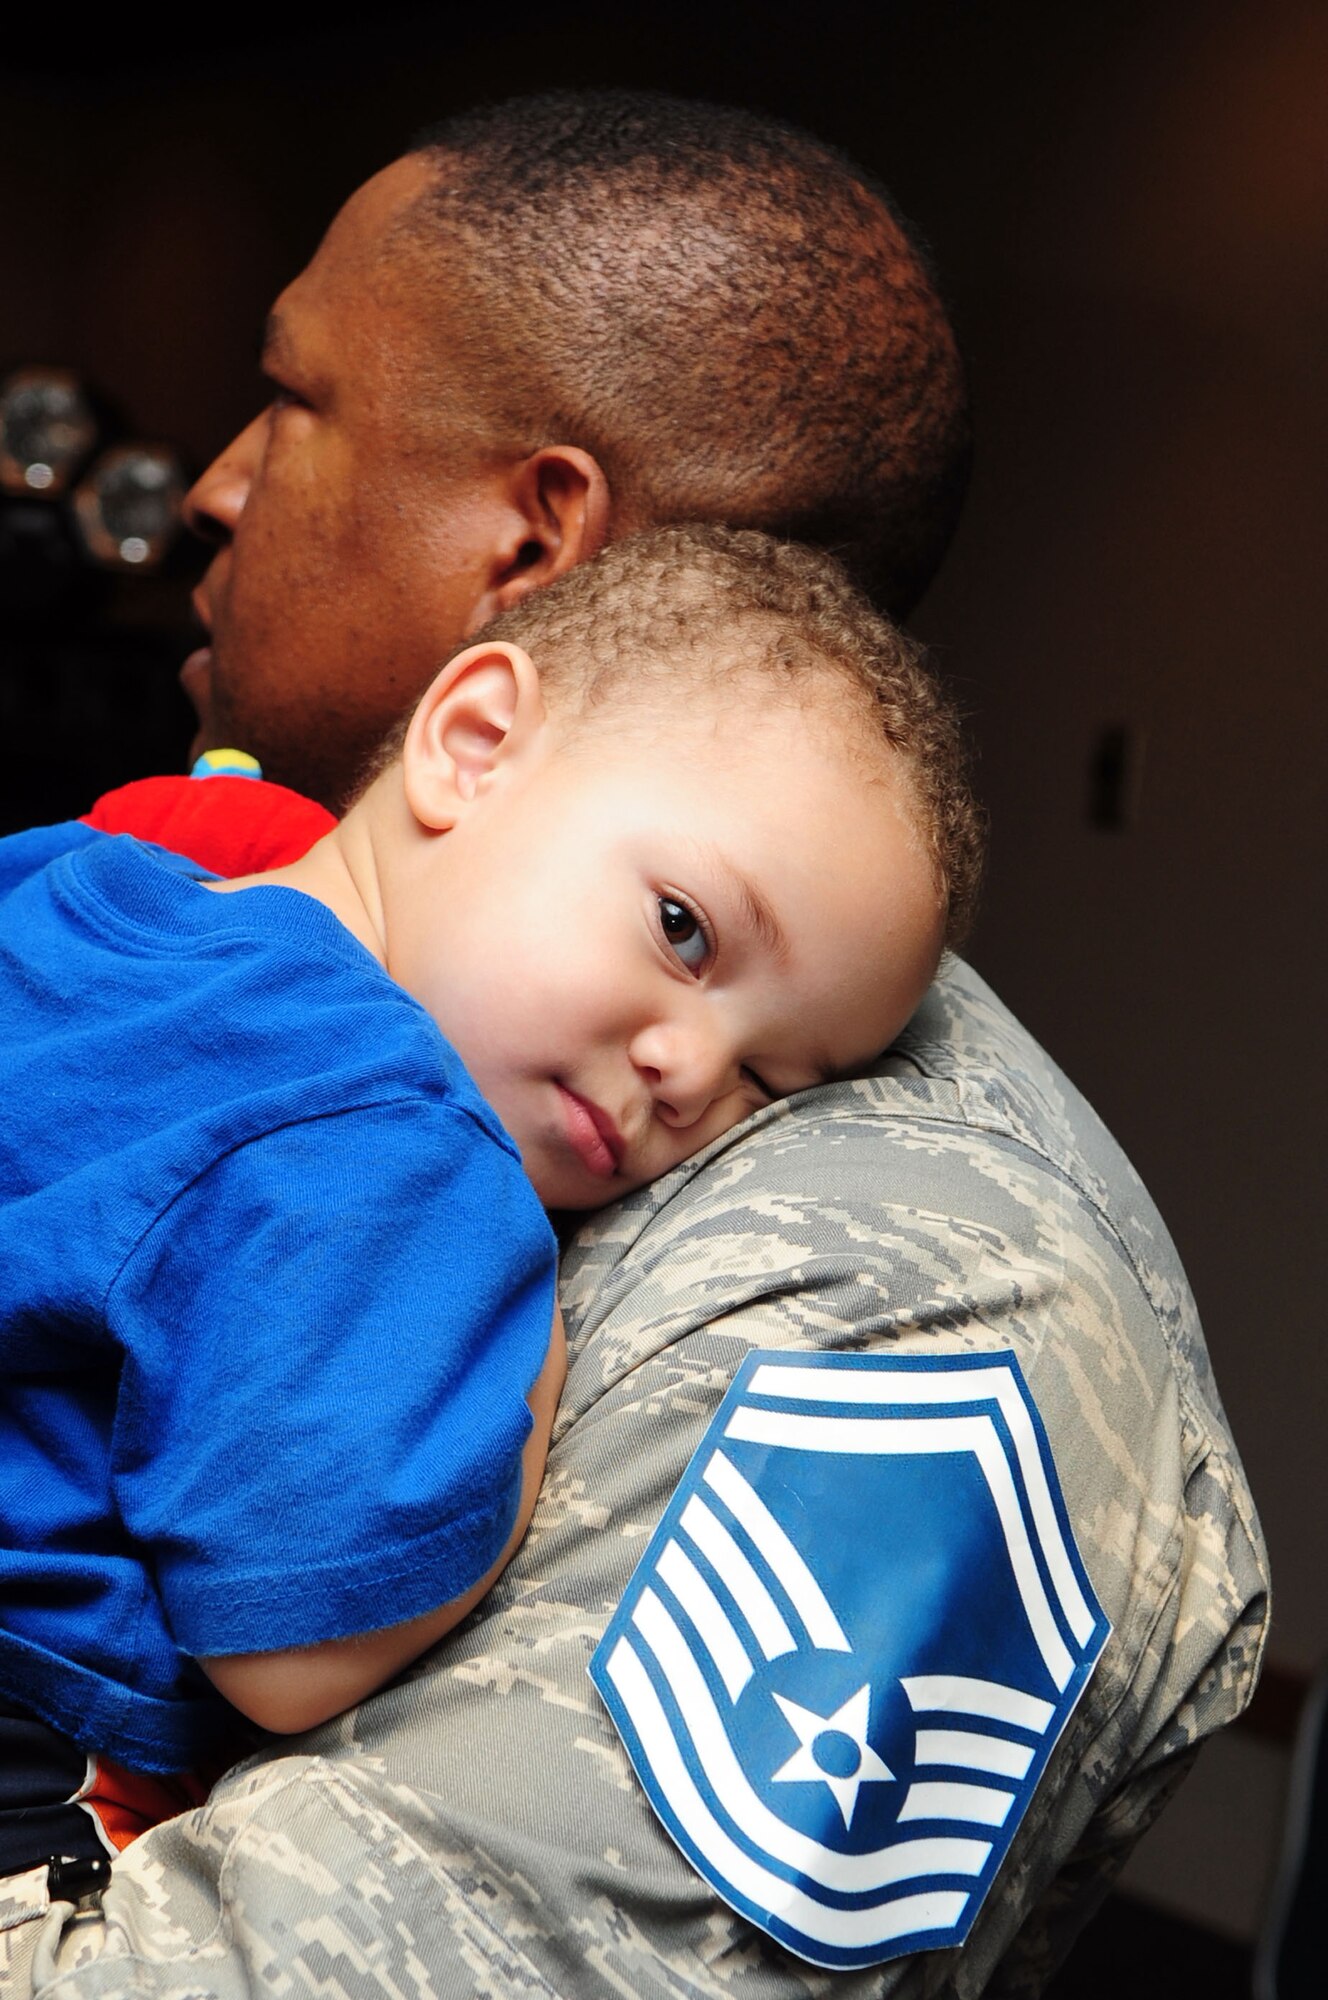 BARKSDALE AIR FORCE BASE, La. -- Master Sgt. Kevin Beasley, Air Force Global Strike Command, holds his son, Nathanael, during the senior master sergeant select party held at the Stripes Club March 9. (U.S. Air Force photo by Senior Airman Joanna M. Kresge)